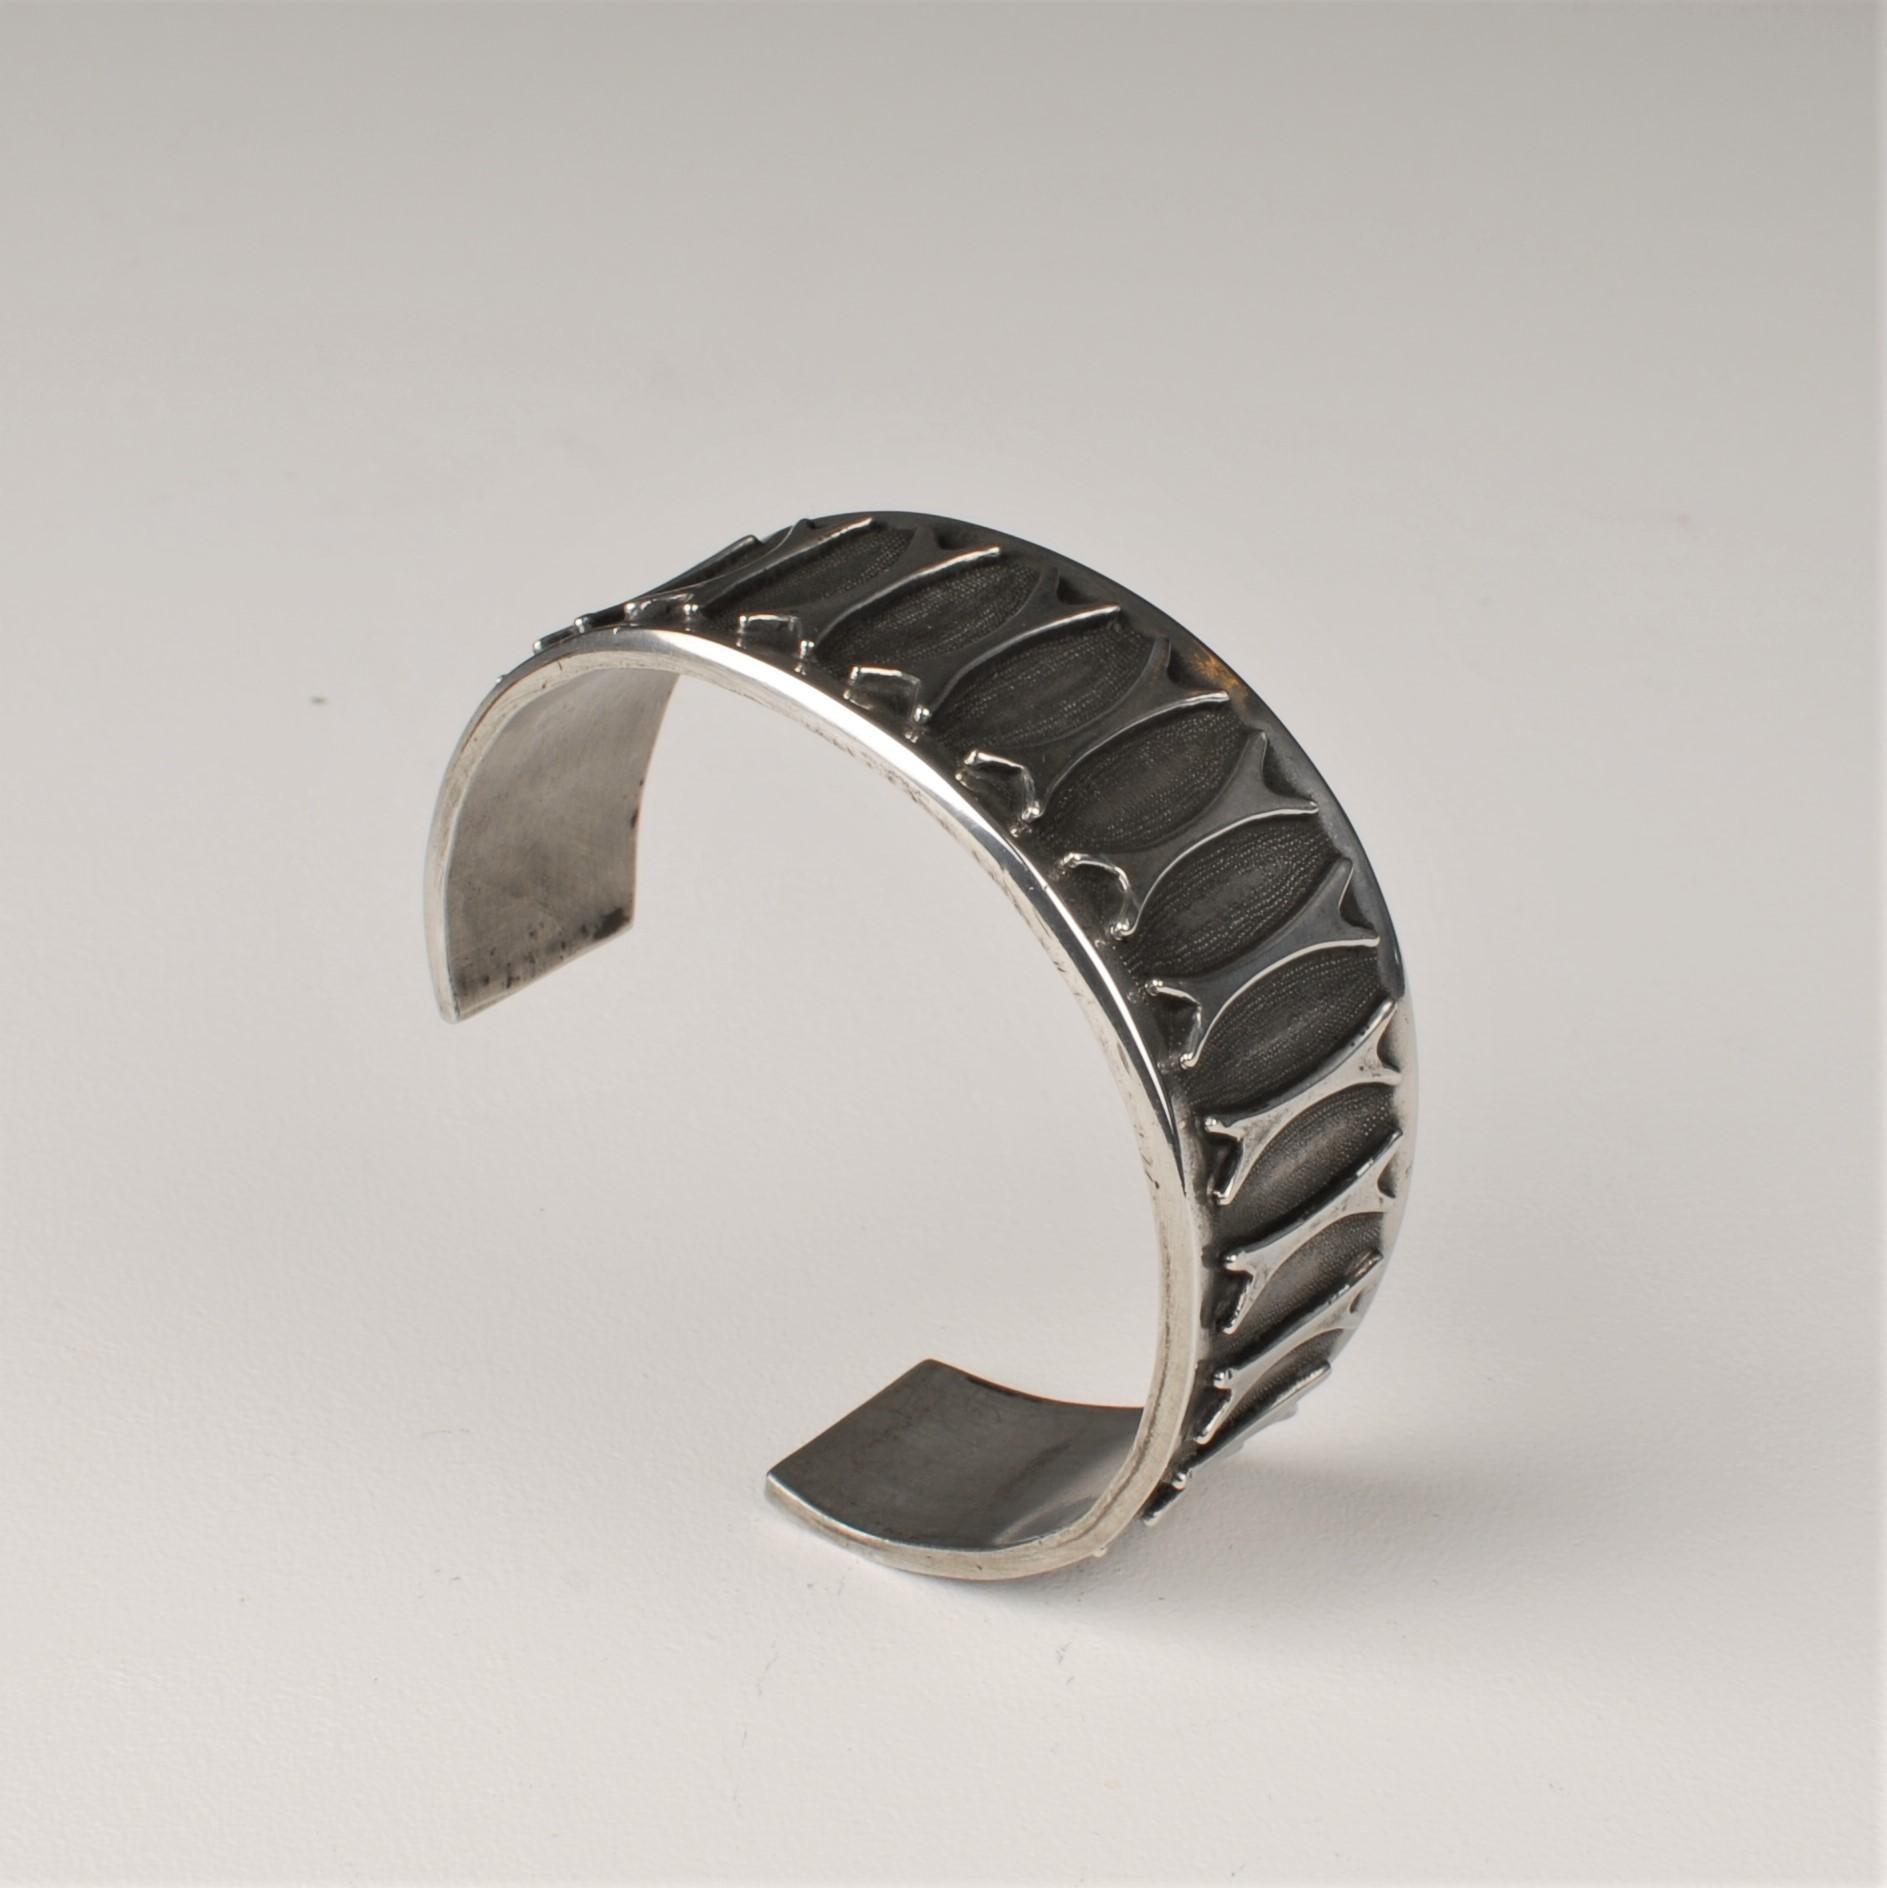 Mid-Century Modern Scandinavian Armband in Pewter Måstad Norway, 1960s.
Beautifully Northern esthetics for this cast pewter armband manufactured by Måstad Norway. Marked inside.
Inside measurements
6.5 width, 5 cm height
Easily extendable 1 cm.